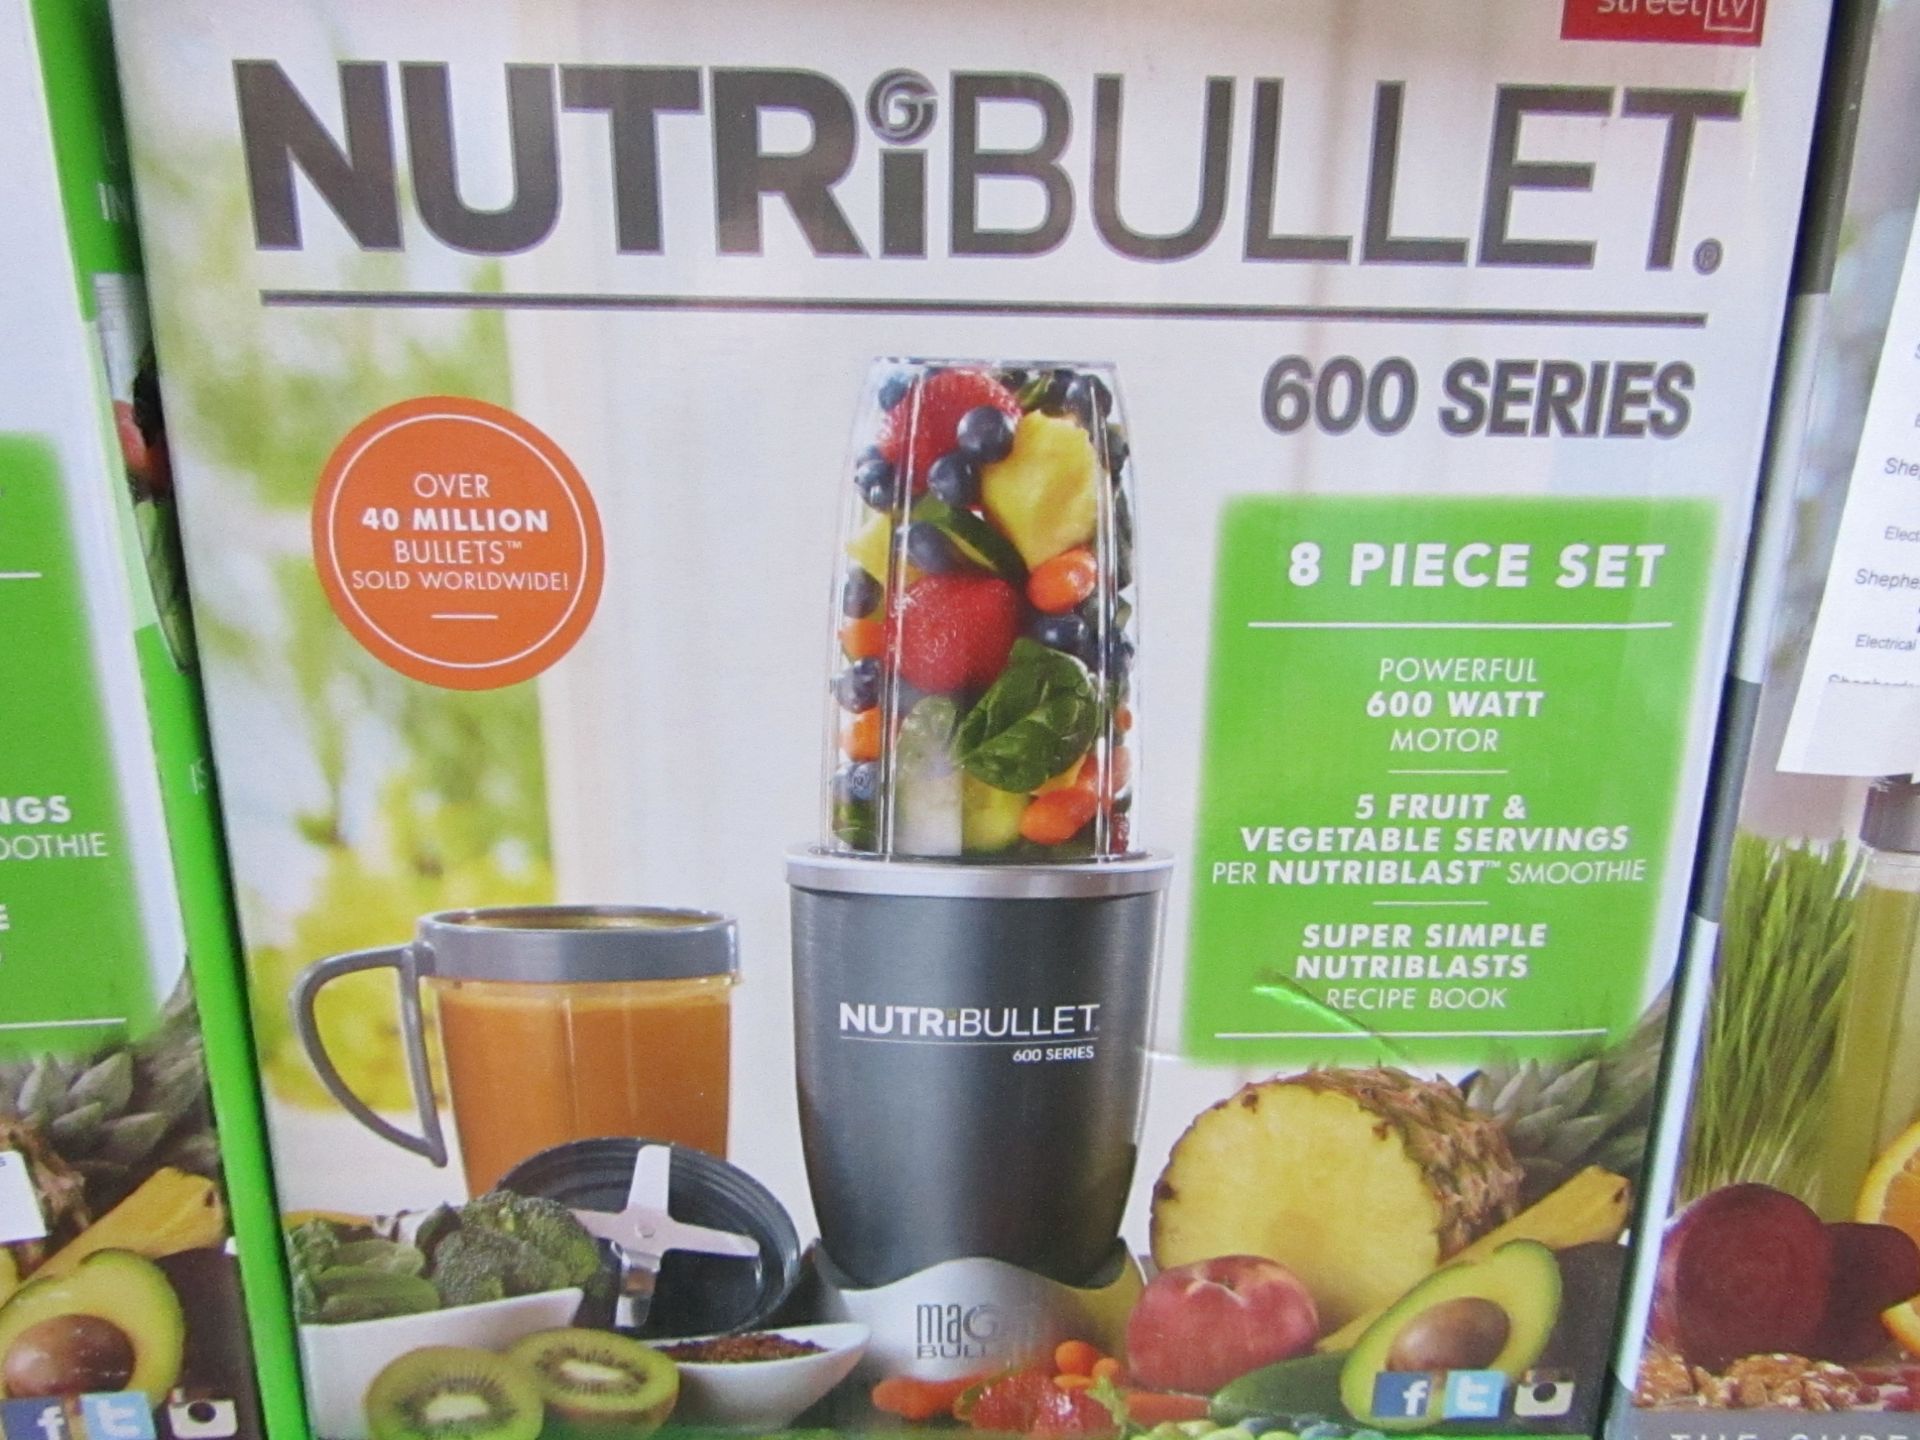 | 1x | nutribullet 600 series | unchecked and boxed | no online re-sale | Sku C5060191467346 |